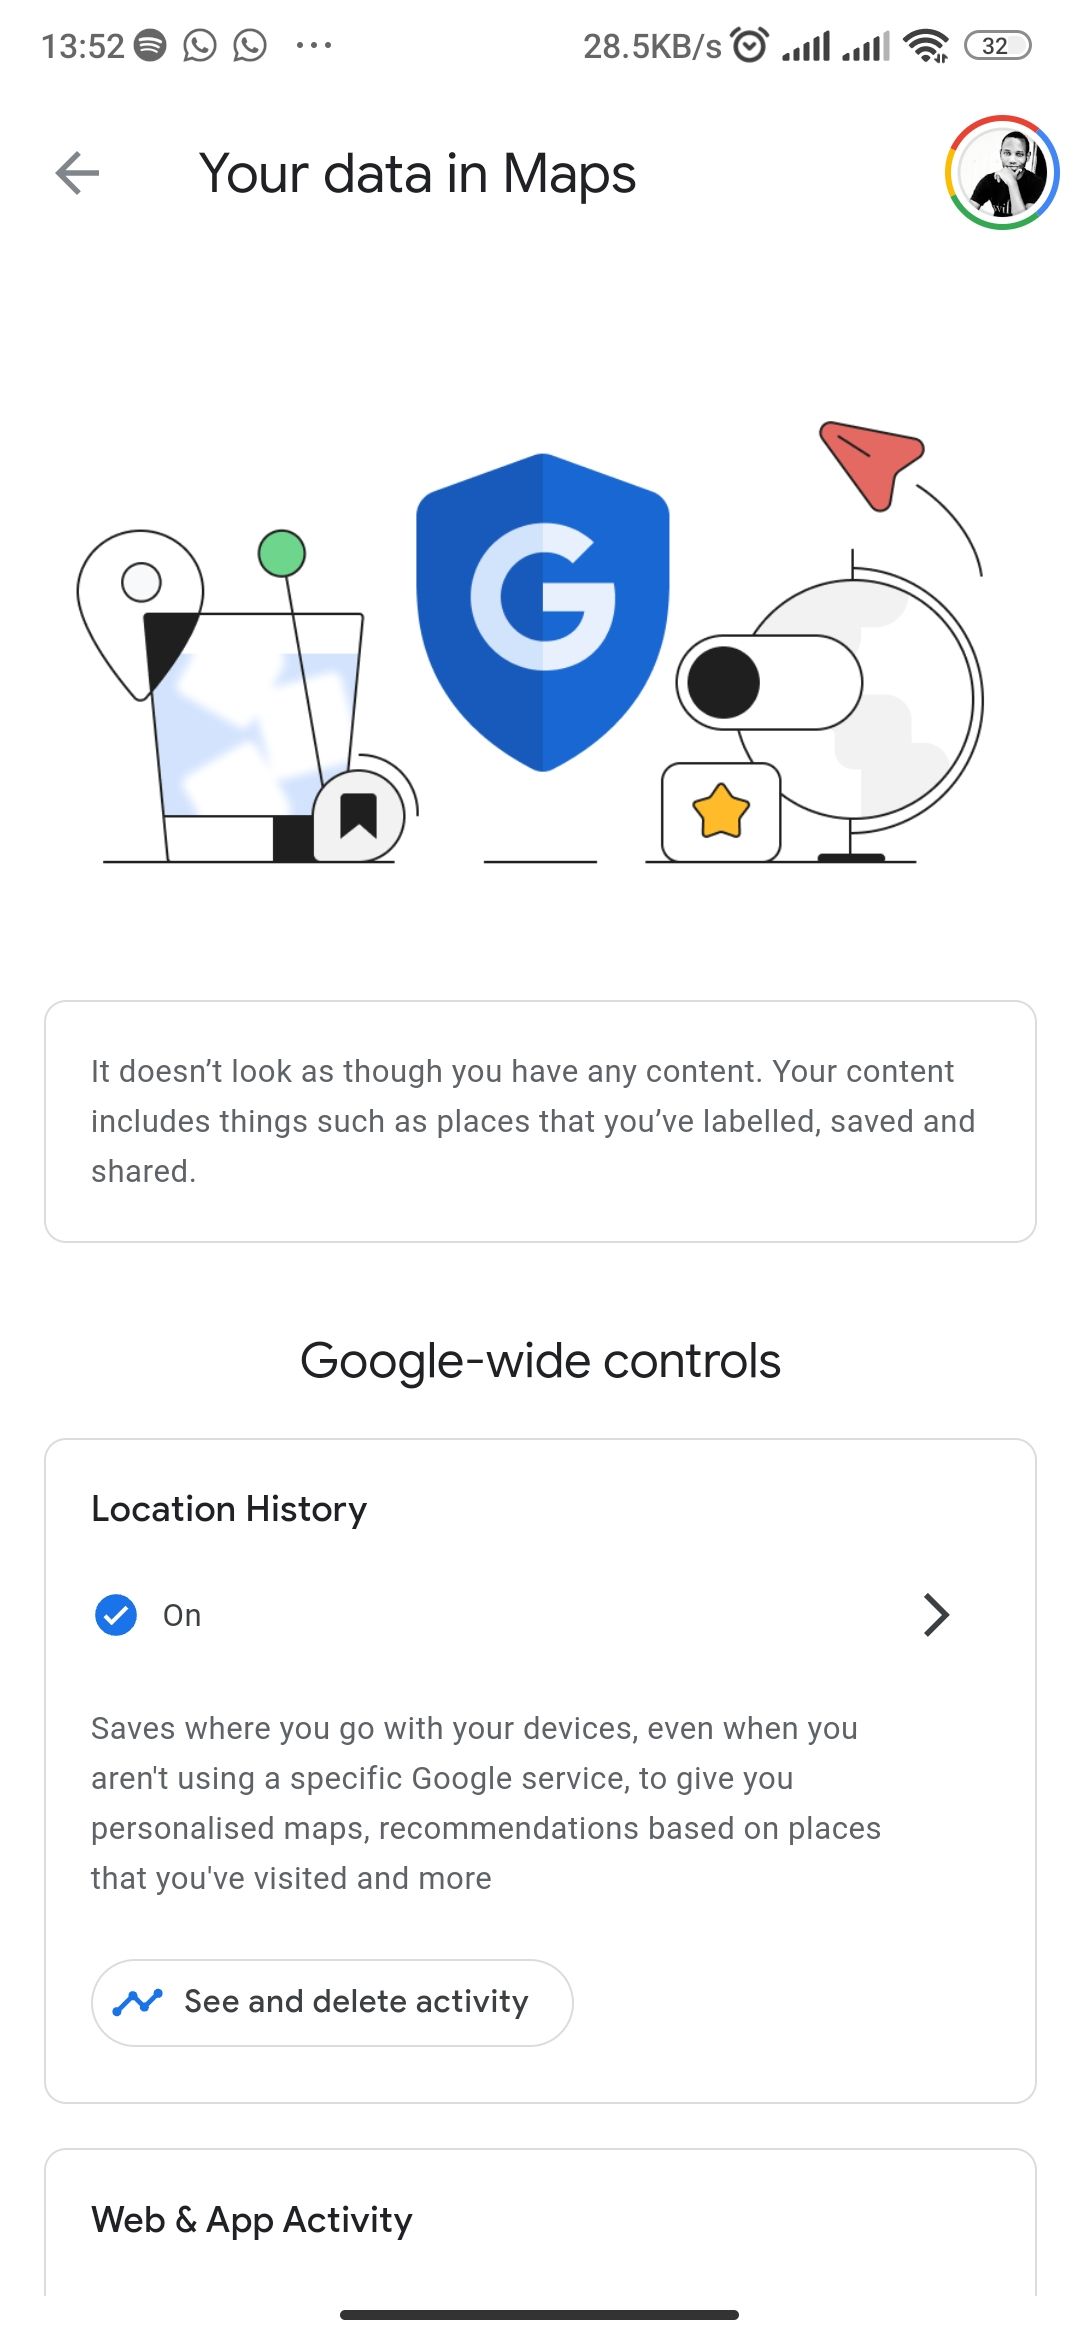 Google-wide controls page with Location History enabled